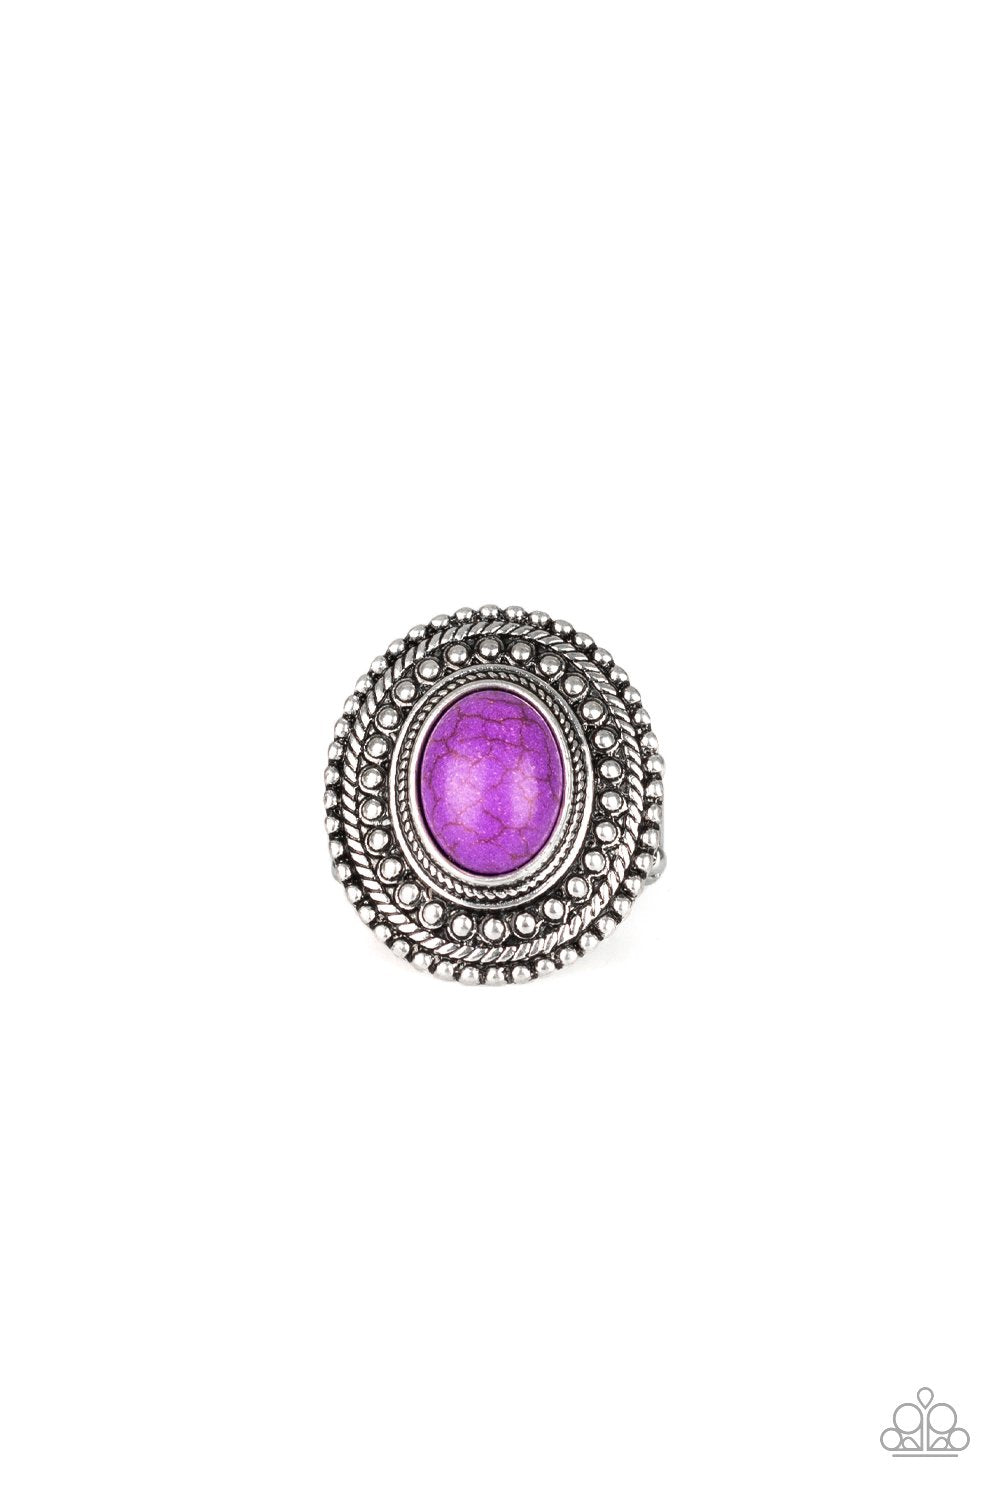 Terra Terrain Purple Stone and Silver Ring - Paparazzi Accessories- lightbox - CarasShop.com - $5 Jewelry by Cara Jewels